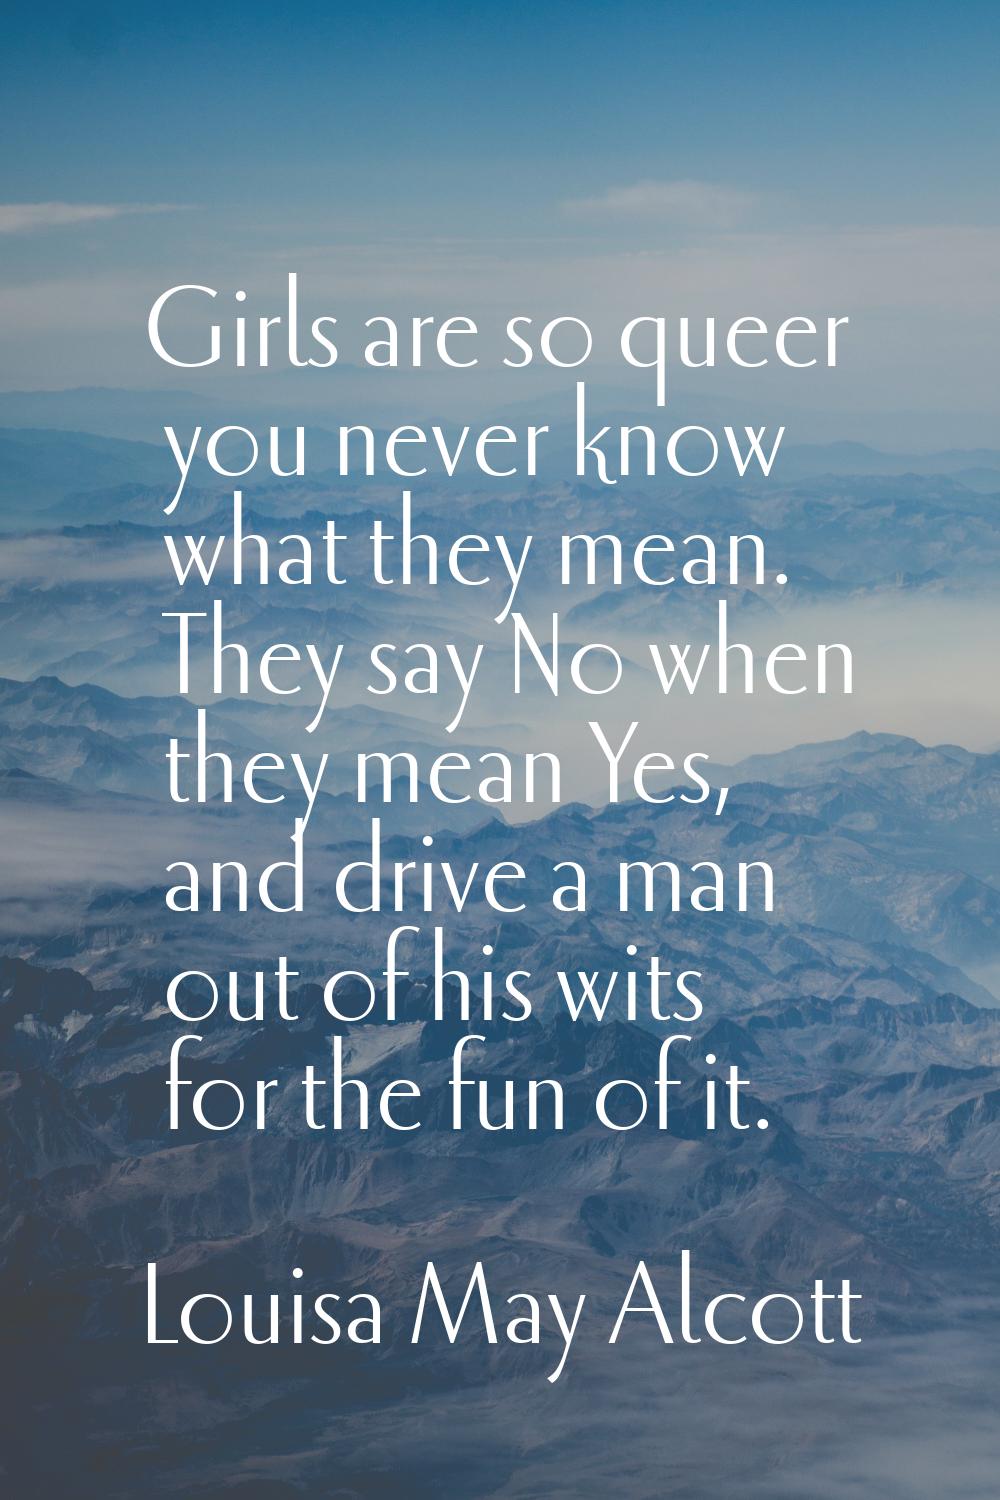 Girls are so queer you never know what they mean. They say No when they mean Yes, and drive a man o